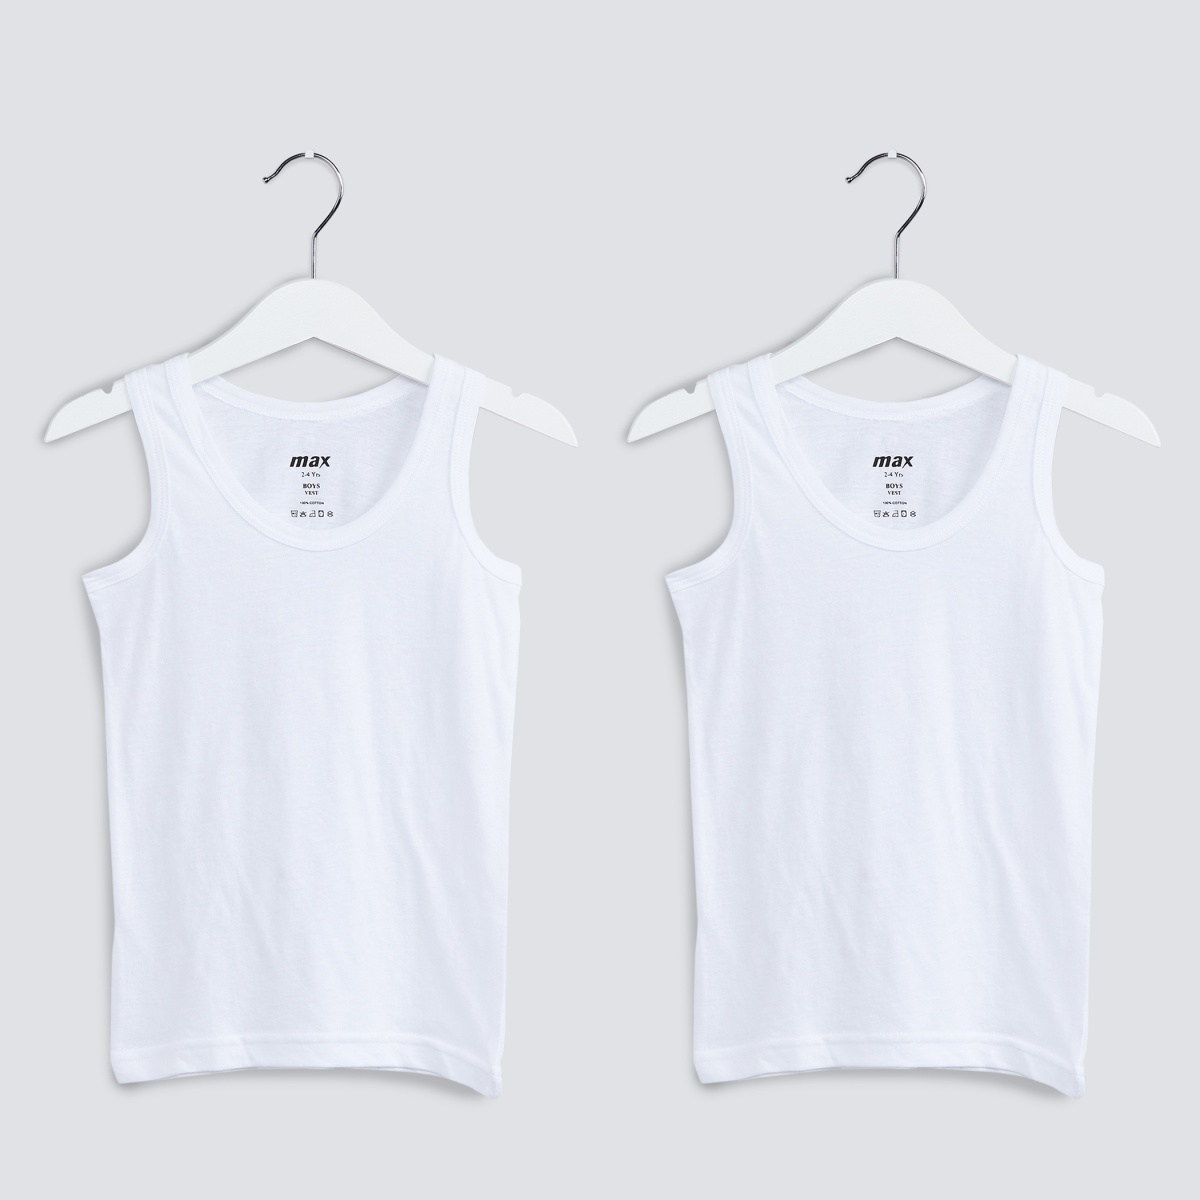 MAX Solid Vests - Set of 2 Pairs.